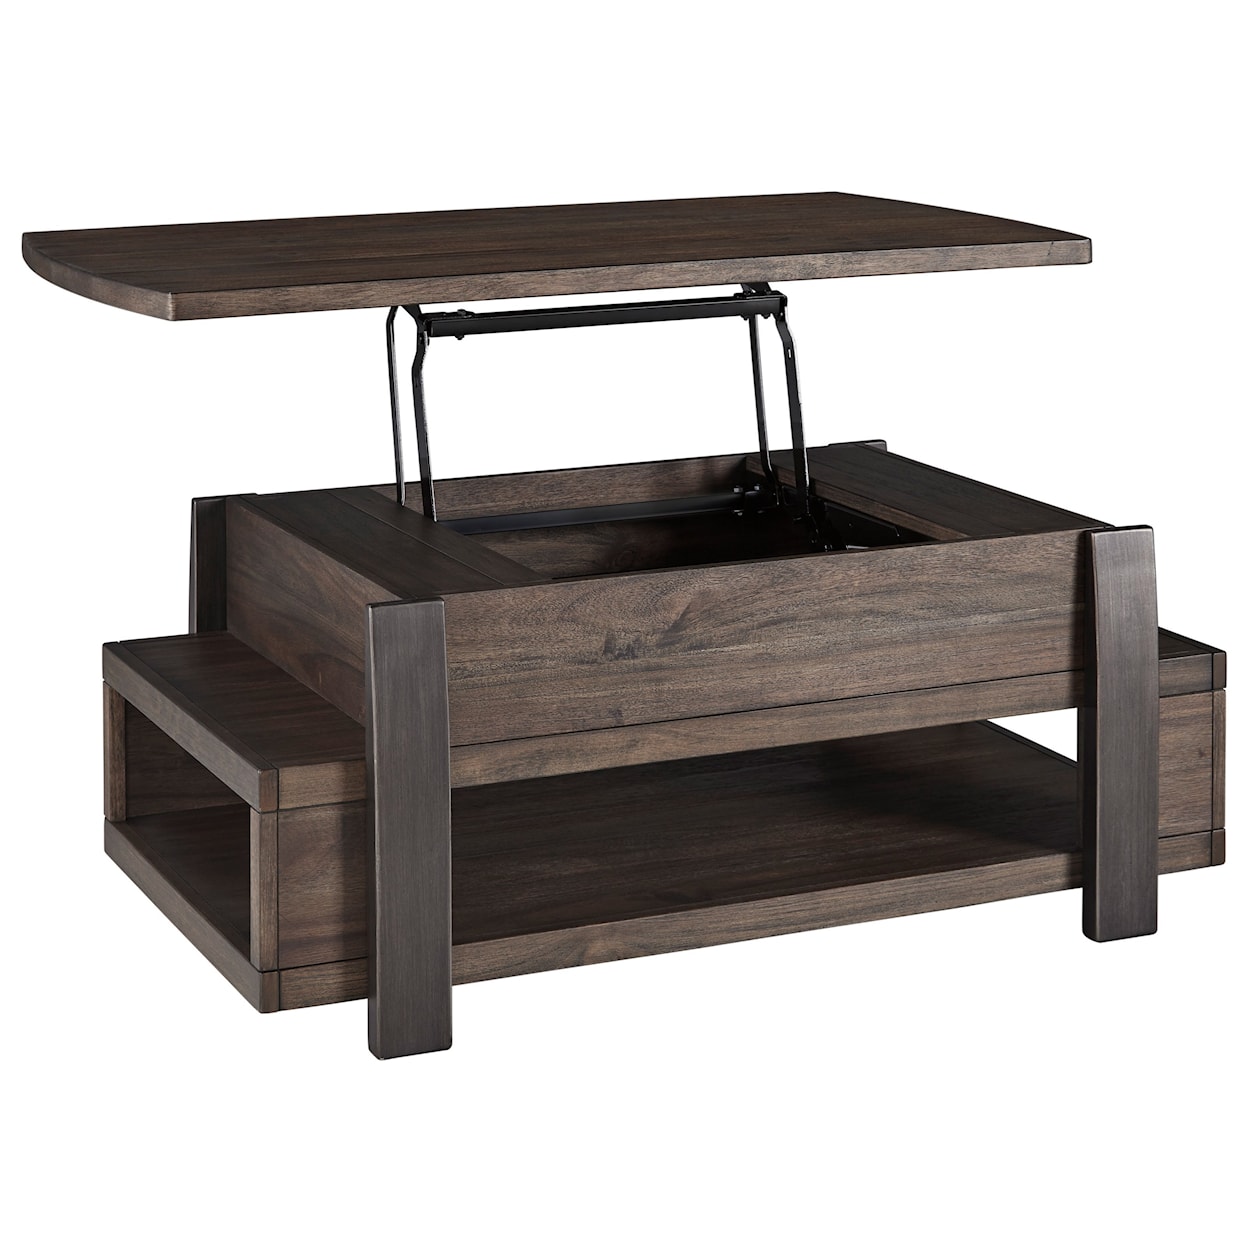 Signature Design by Ashley Furniture Vailbry Lift Top Cocktail Table